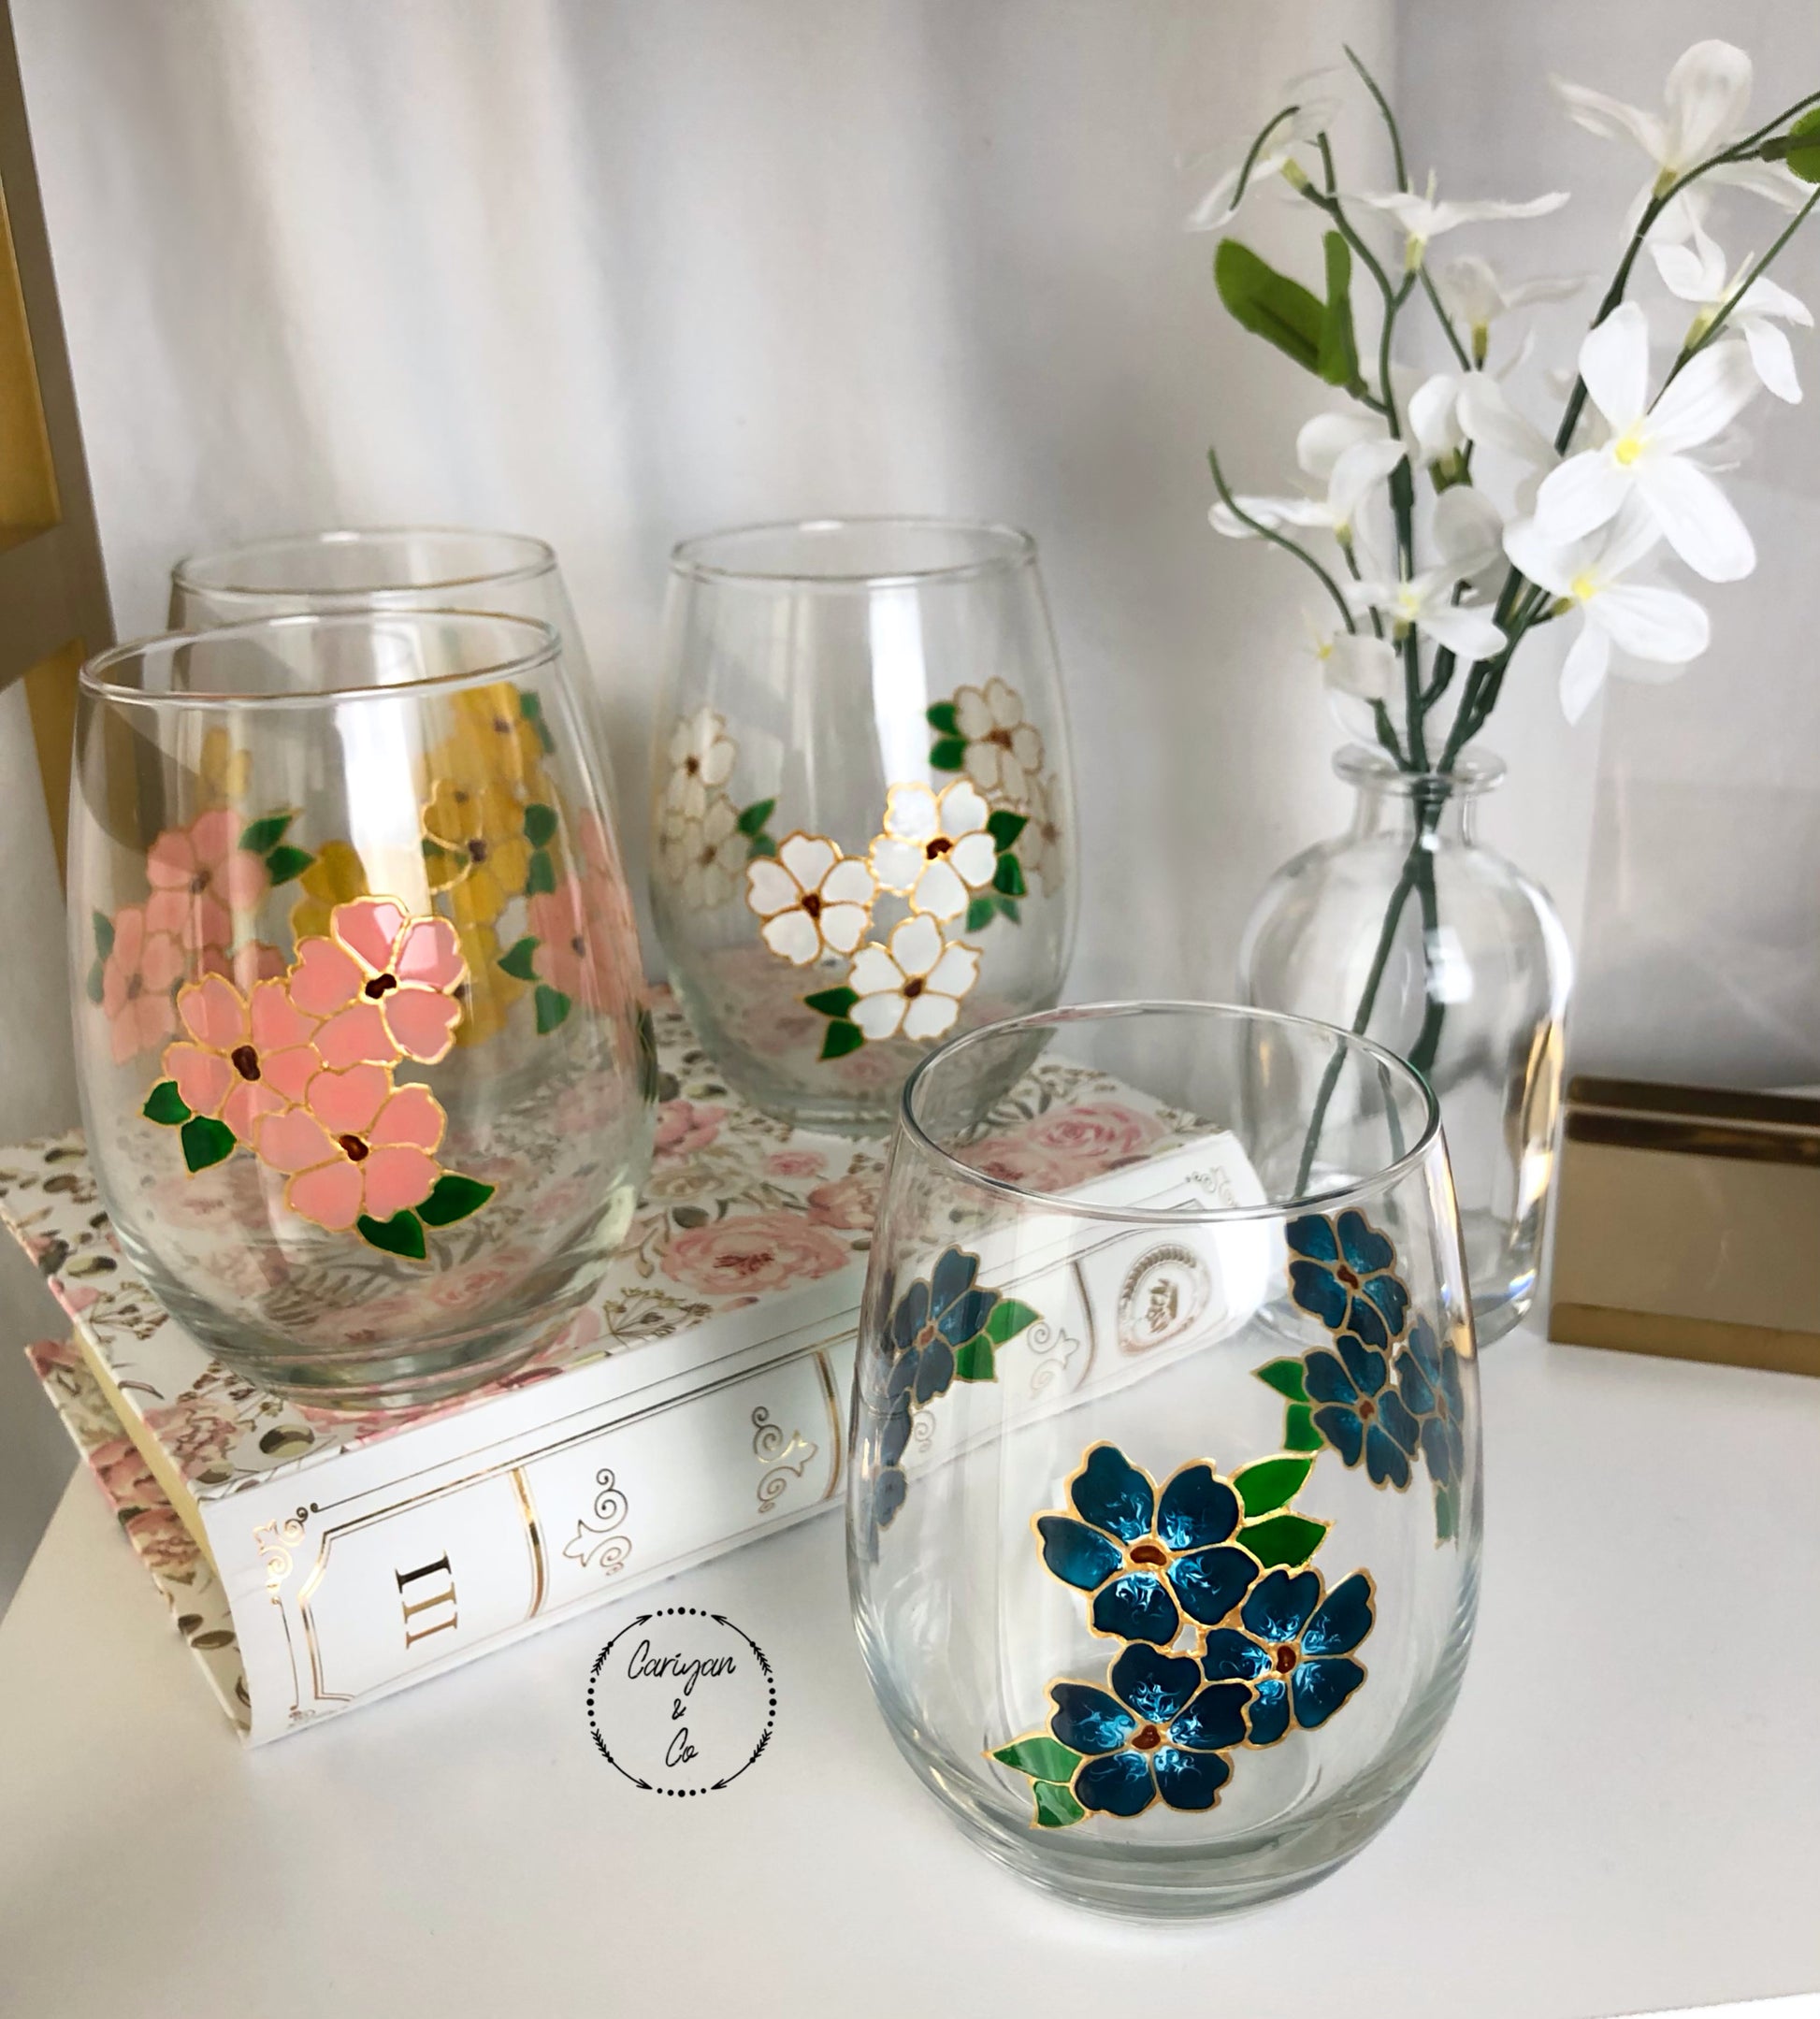 Set 4 Shabby Chic Floral Flower Spring Indoor Outdoor Acrylic Wine Stem  Glasses